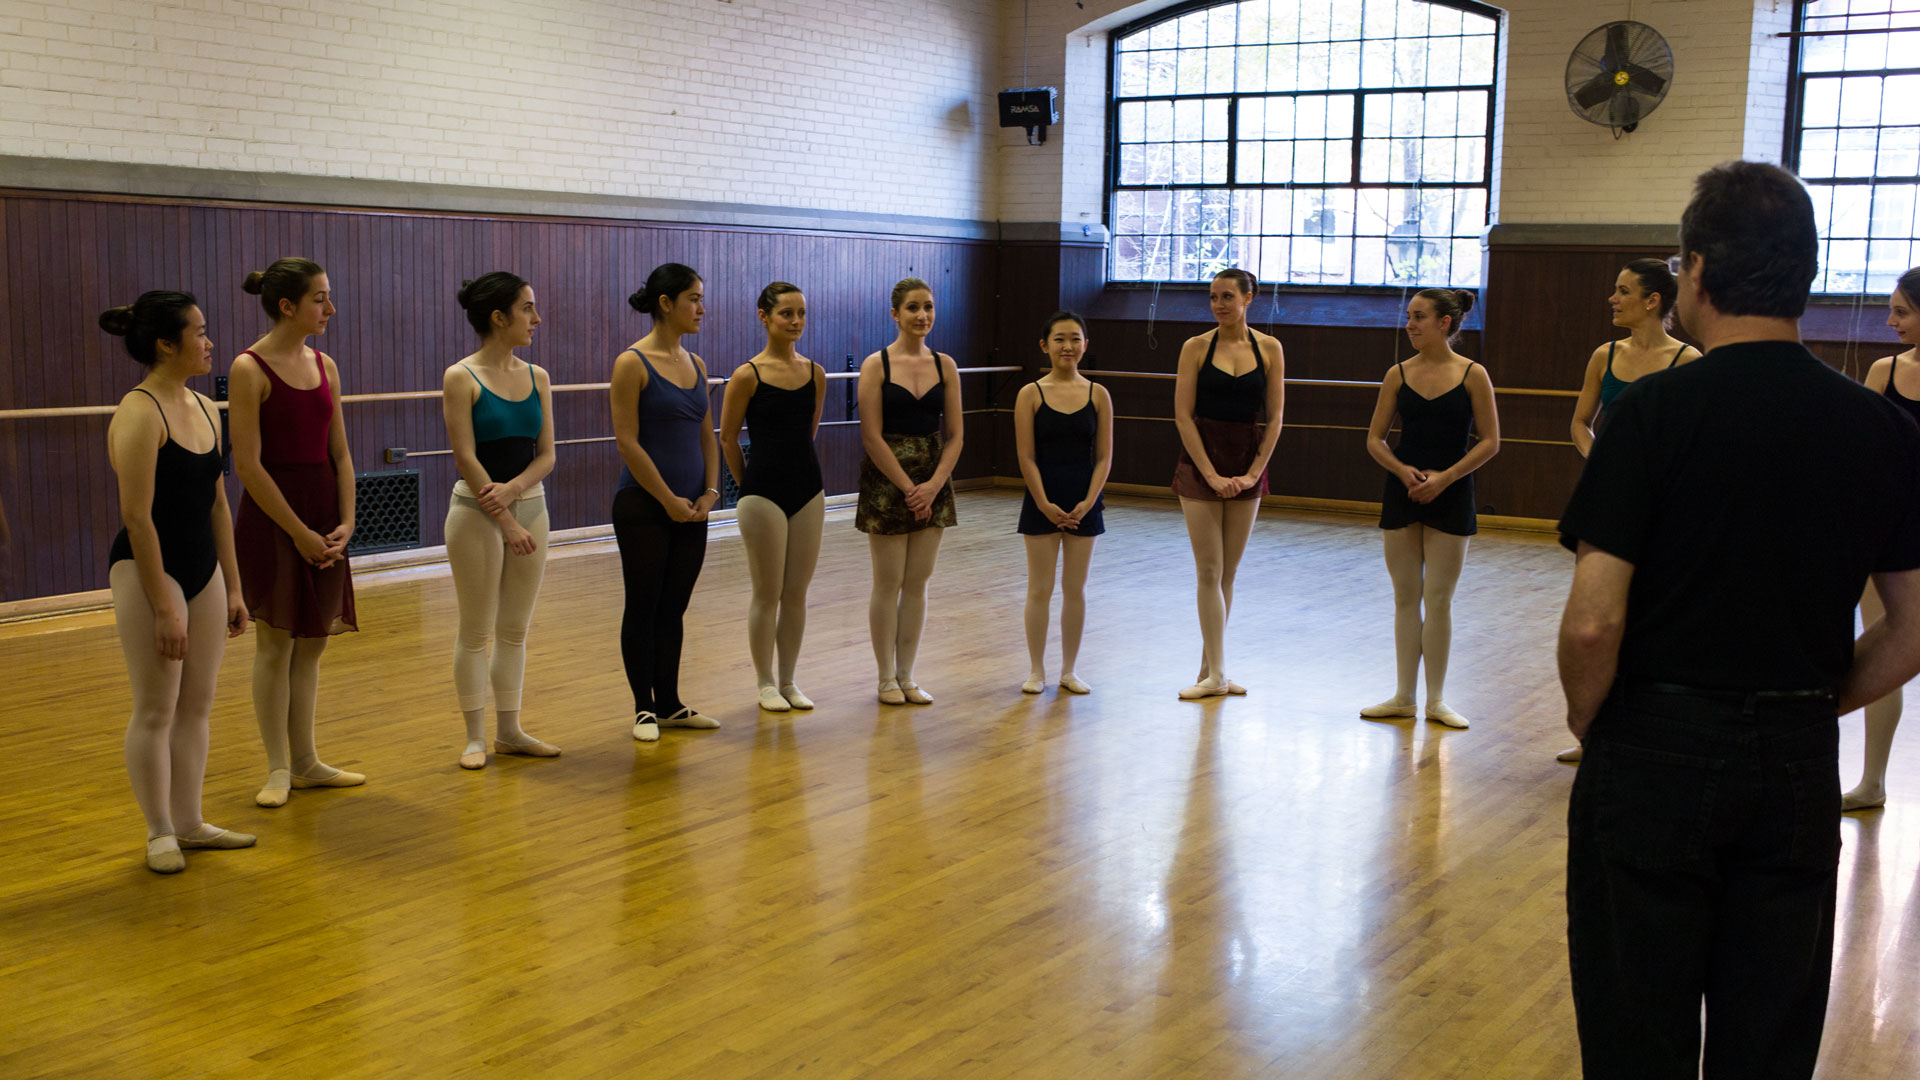 Photo of ballet class in session.